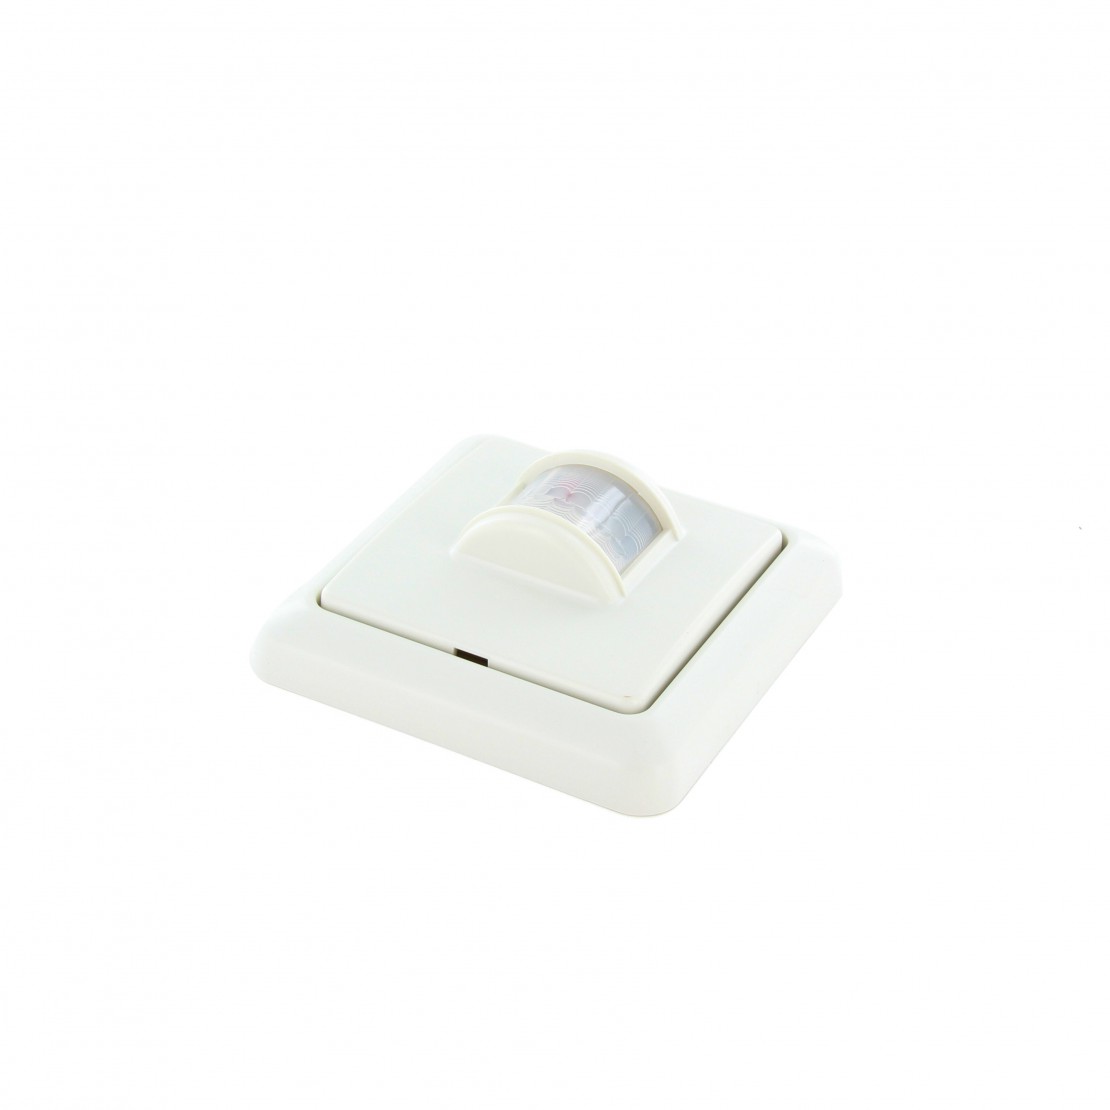 Switch with motion sensor (white)